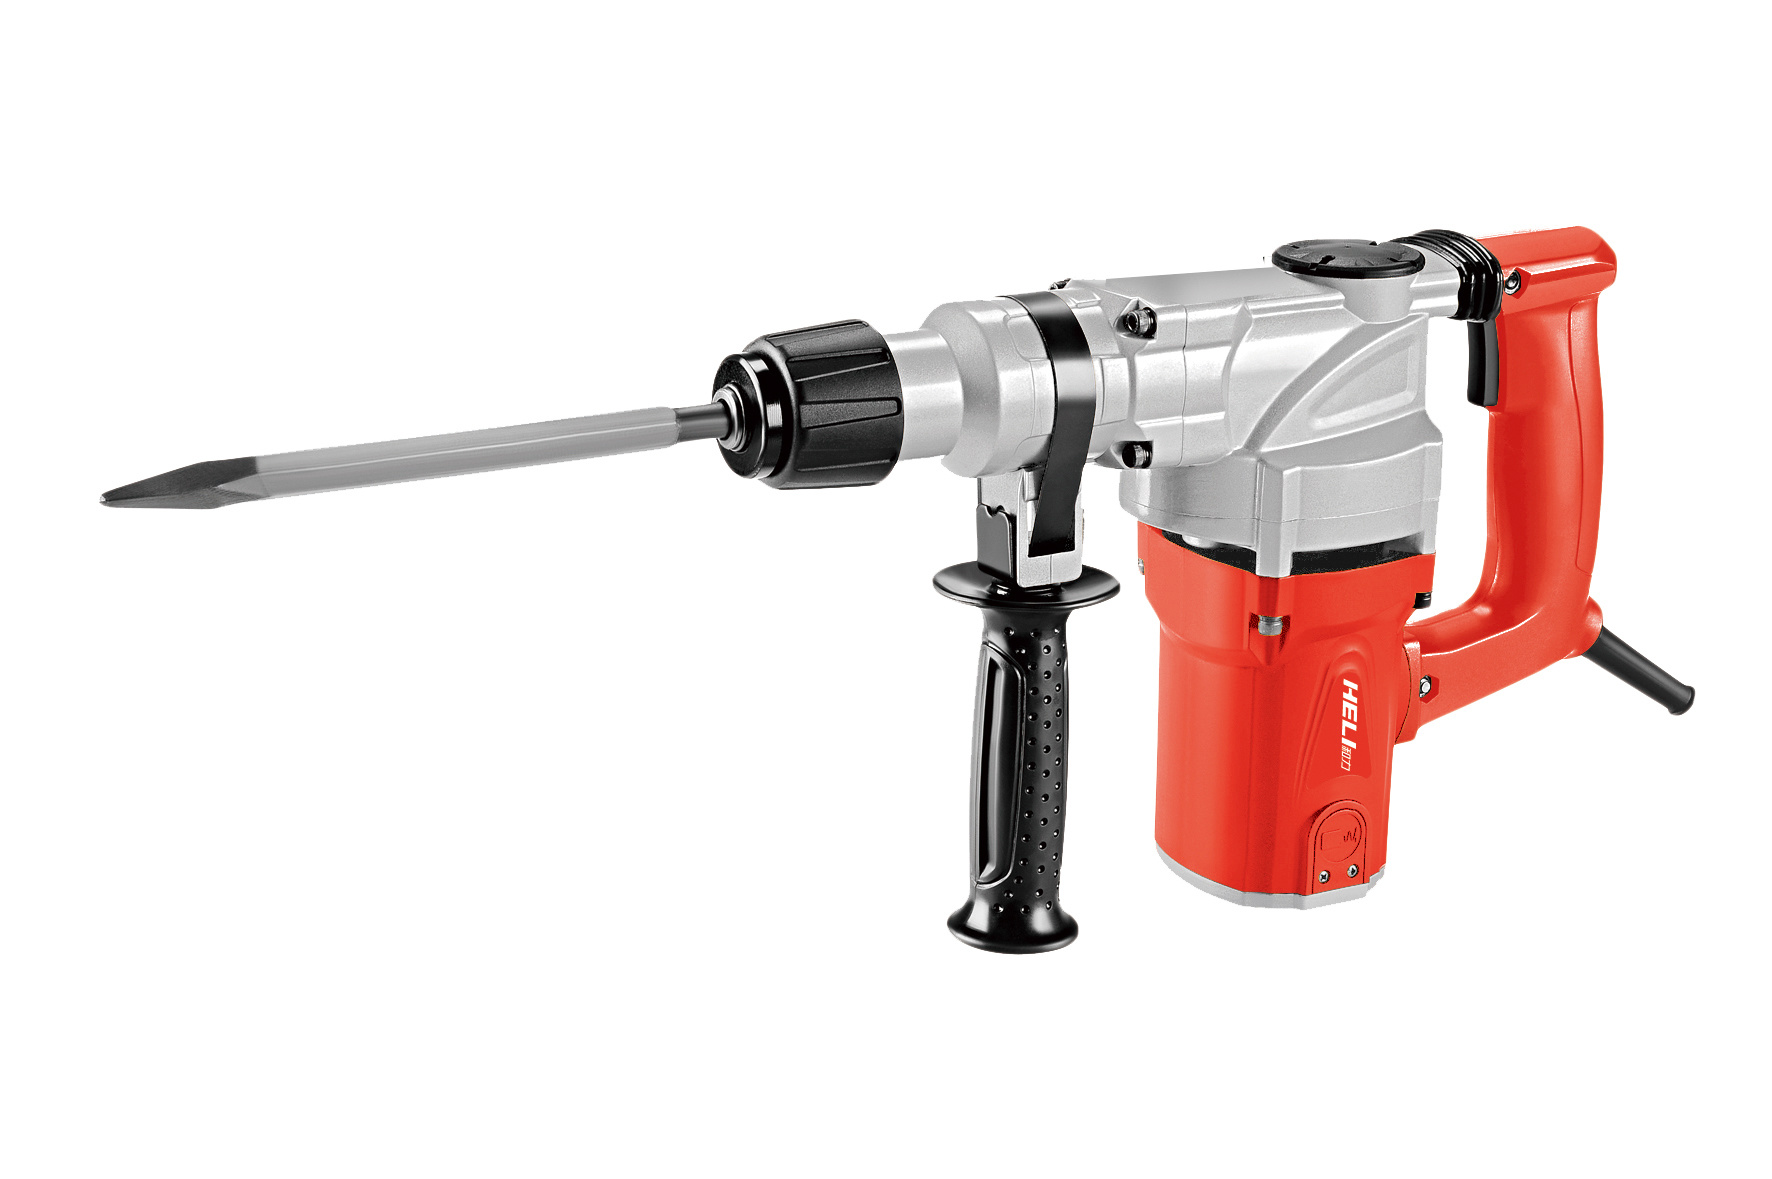 800W Classic Model Two Fuction Rotary Hammer (28-1)